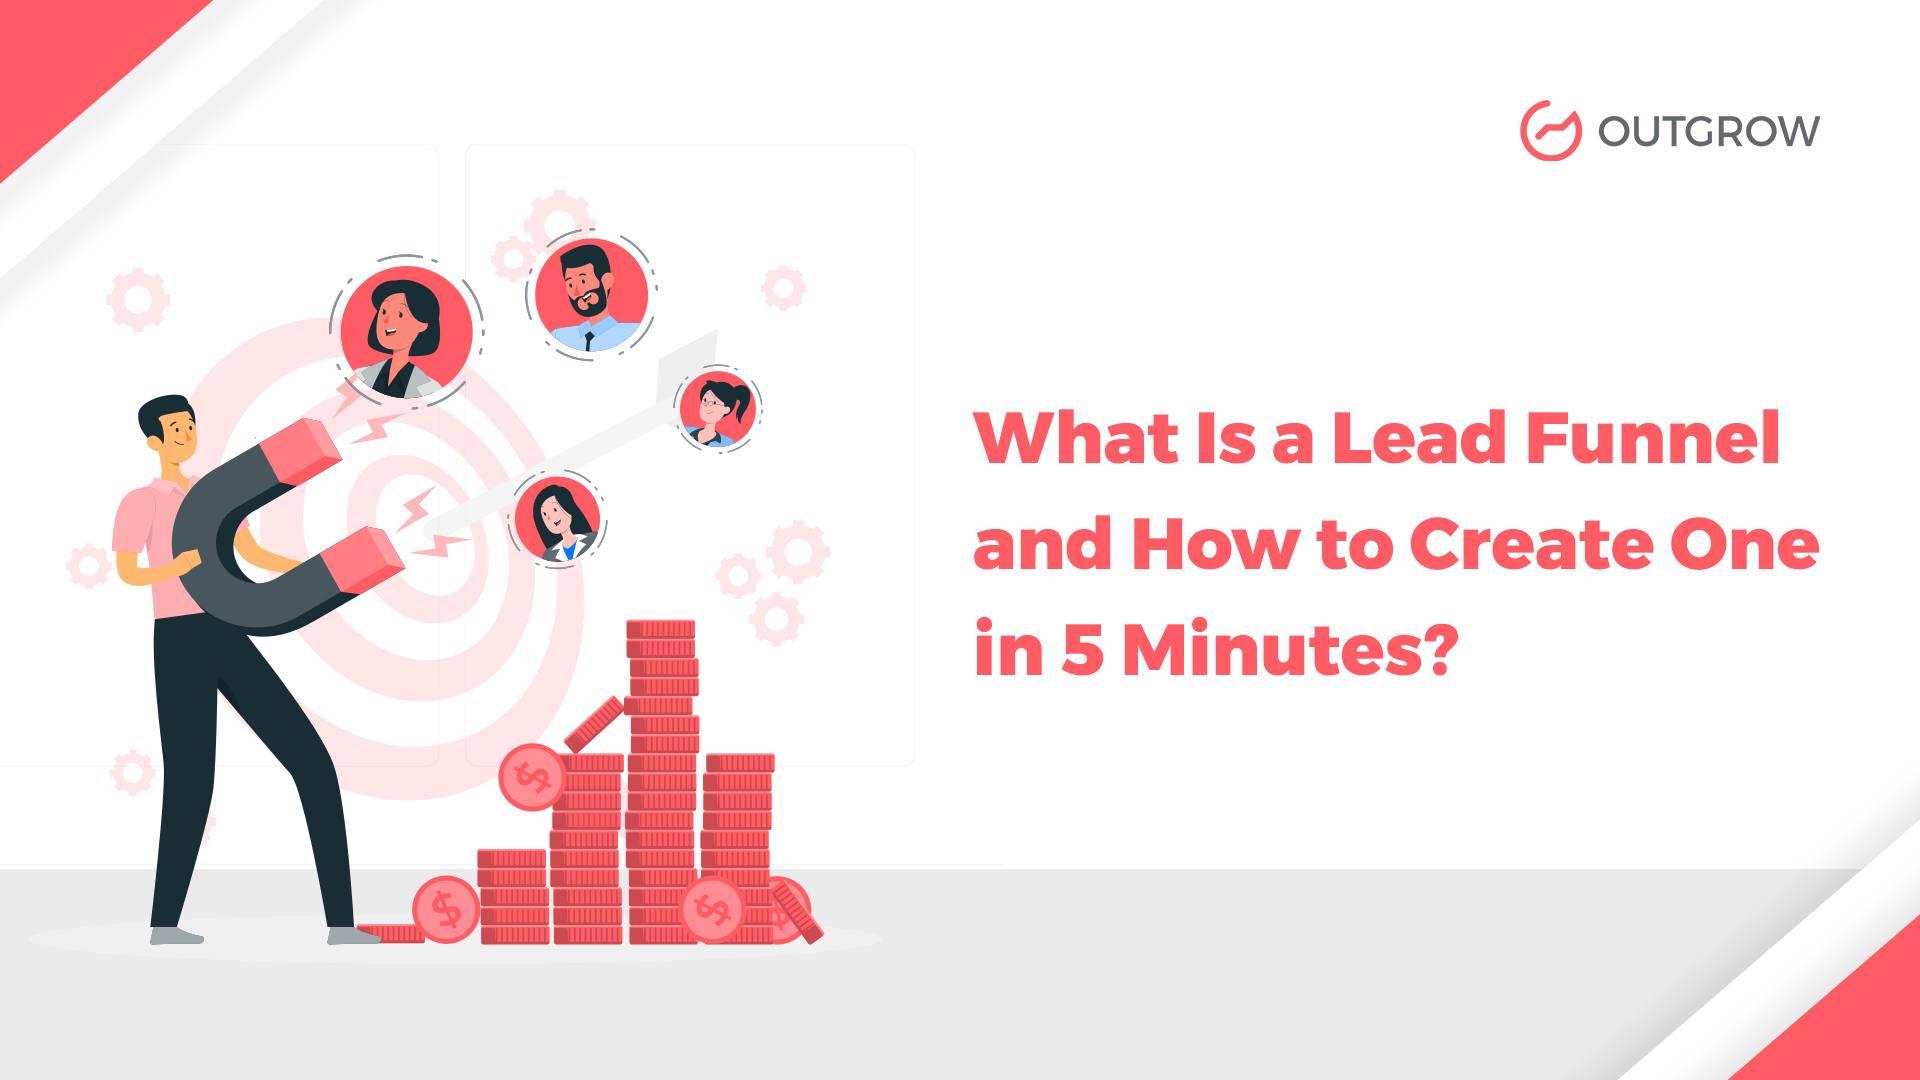 What Is a Lead Funnel and How to Create One in 5 Minutes?